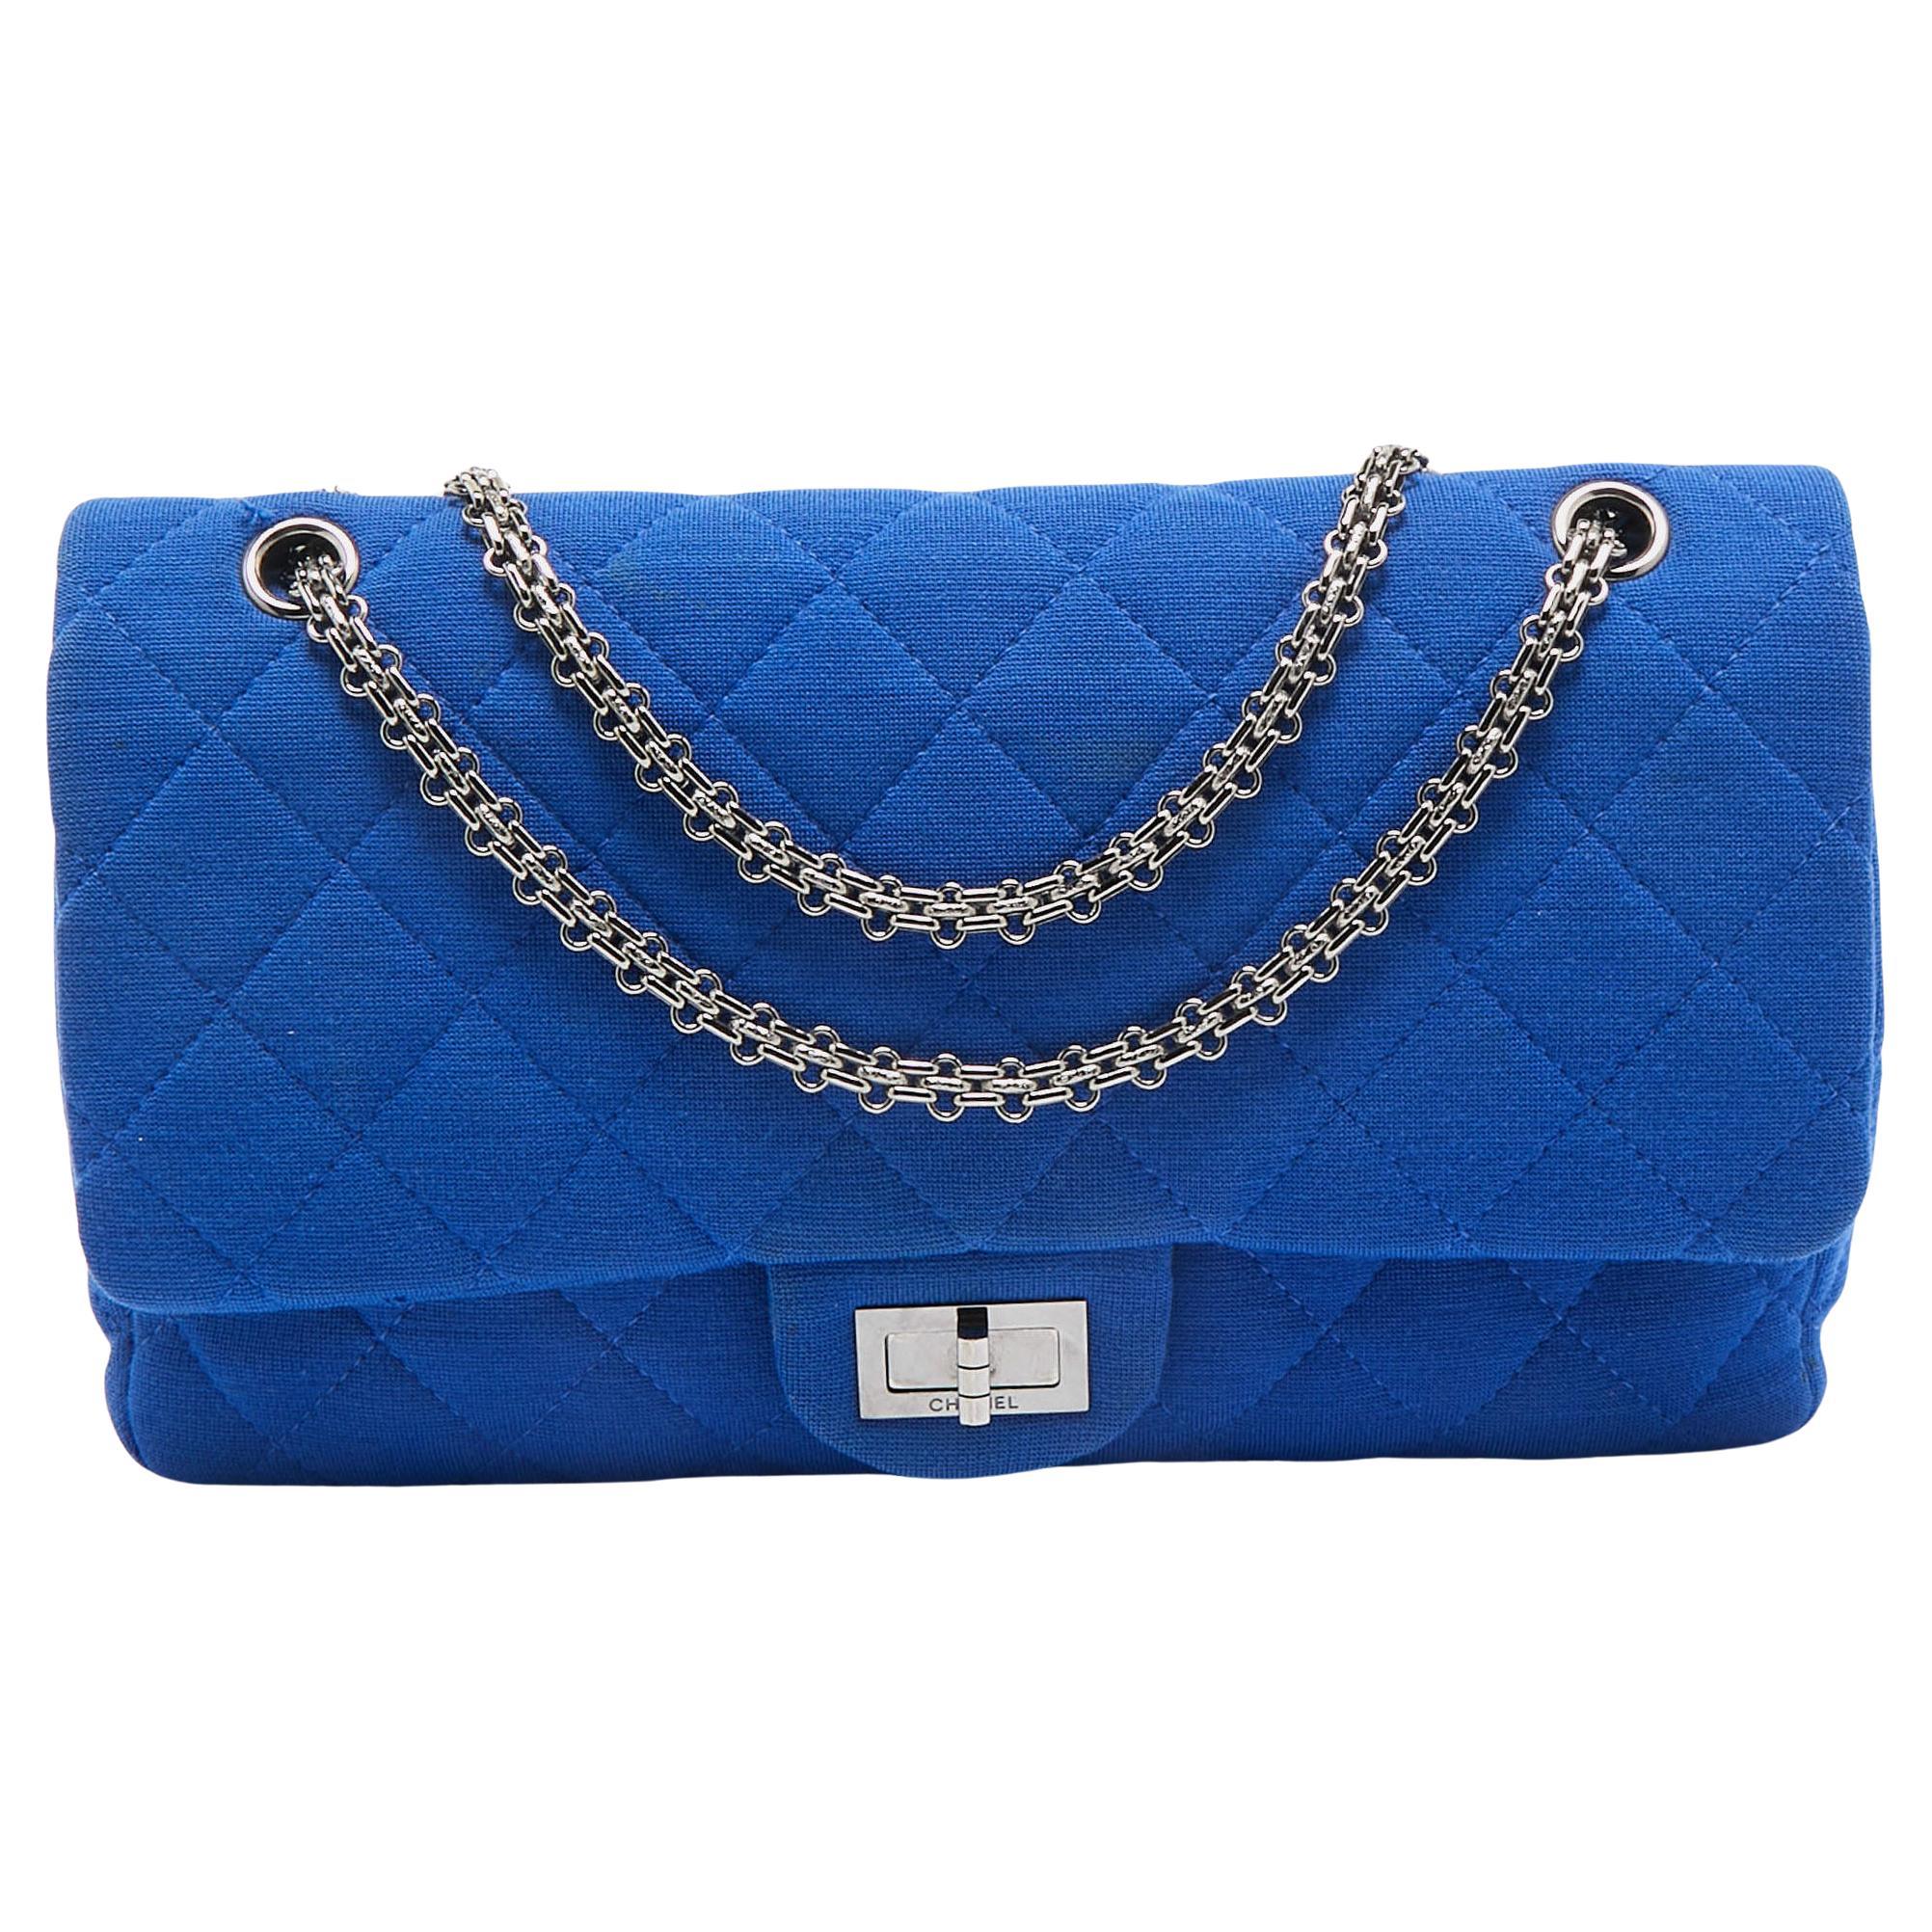 Chanel Blue Jersey Classic 227 Reissue 2.55 Flap Bag For Sale